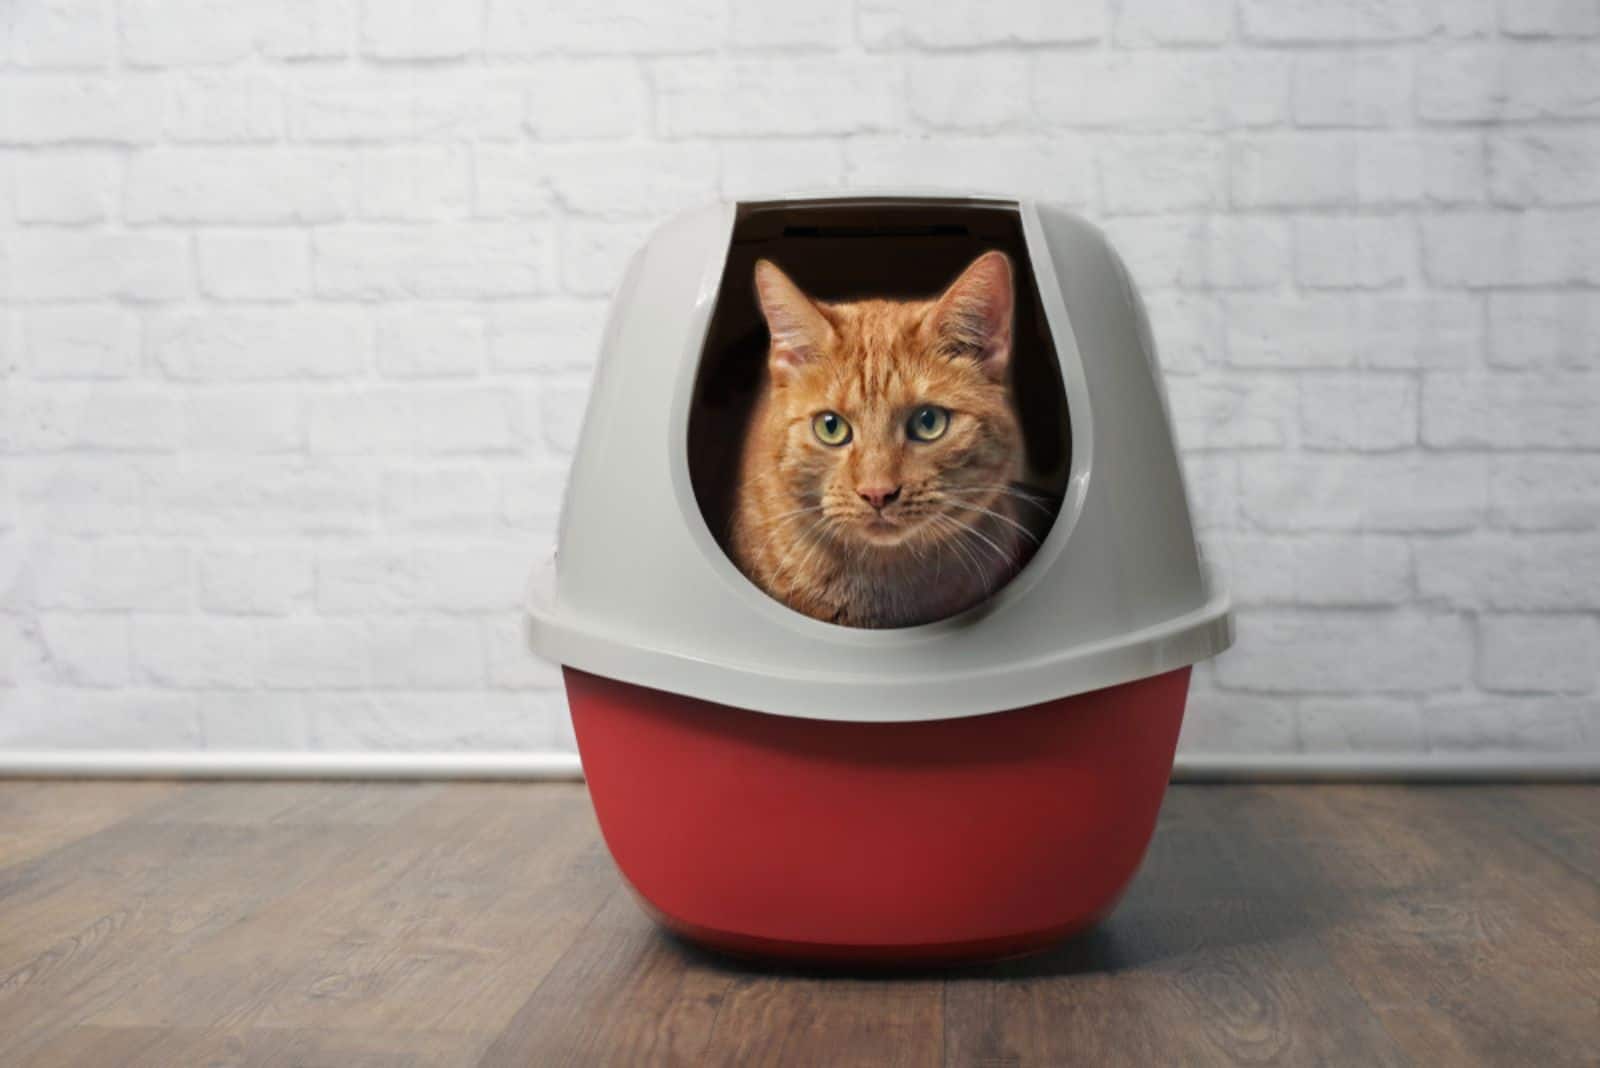 Cute ginger cat using a red, closed litter box